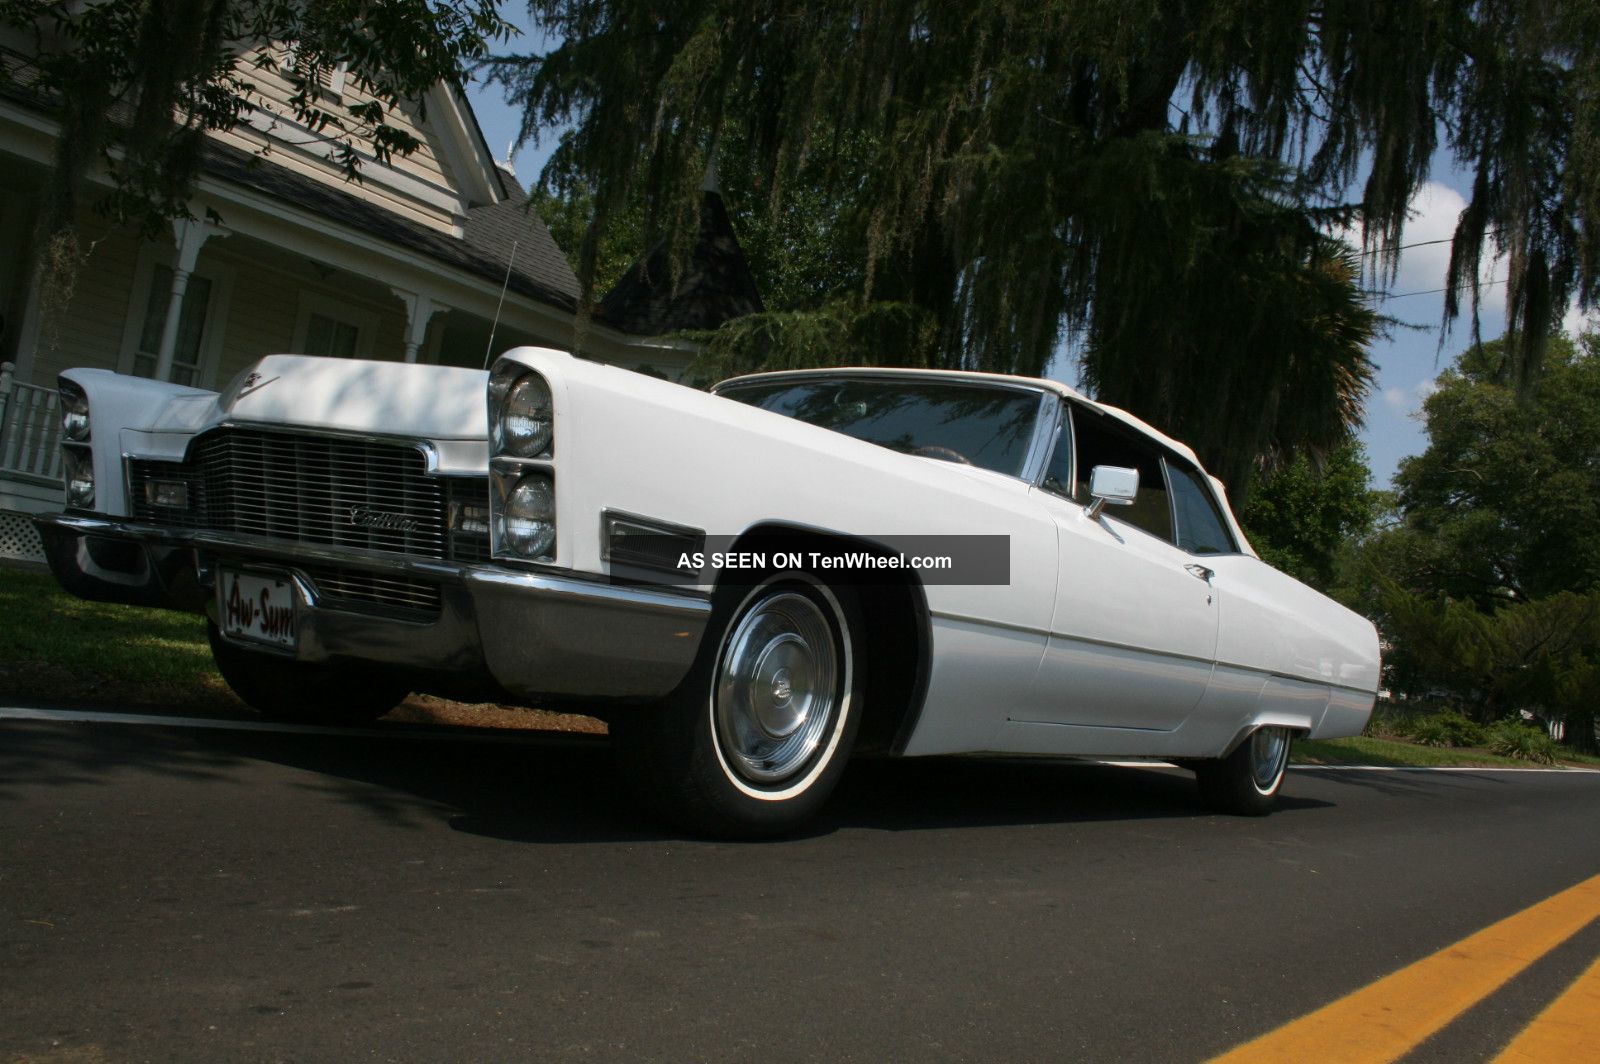 Fantastic 1968 Cadillac Deville Convertible Prices To Sell Will DeVille photo